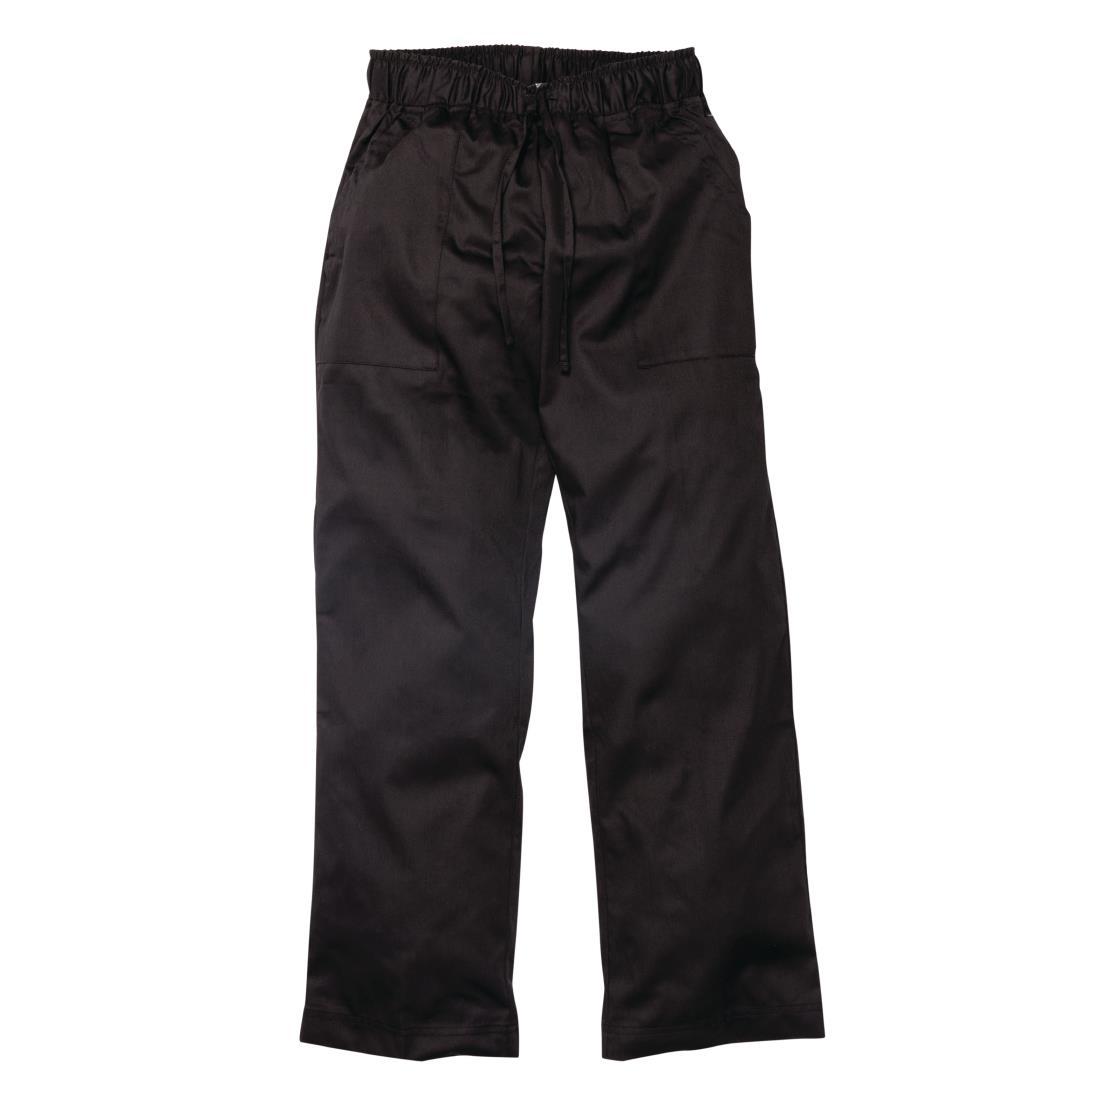 Chef Works Womens Executive Chef Trousers Black L - A431-L  - 2